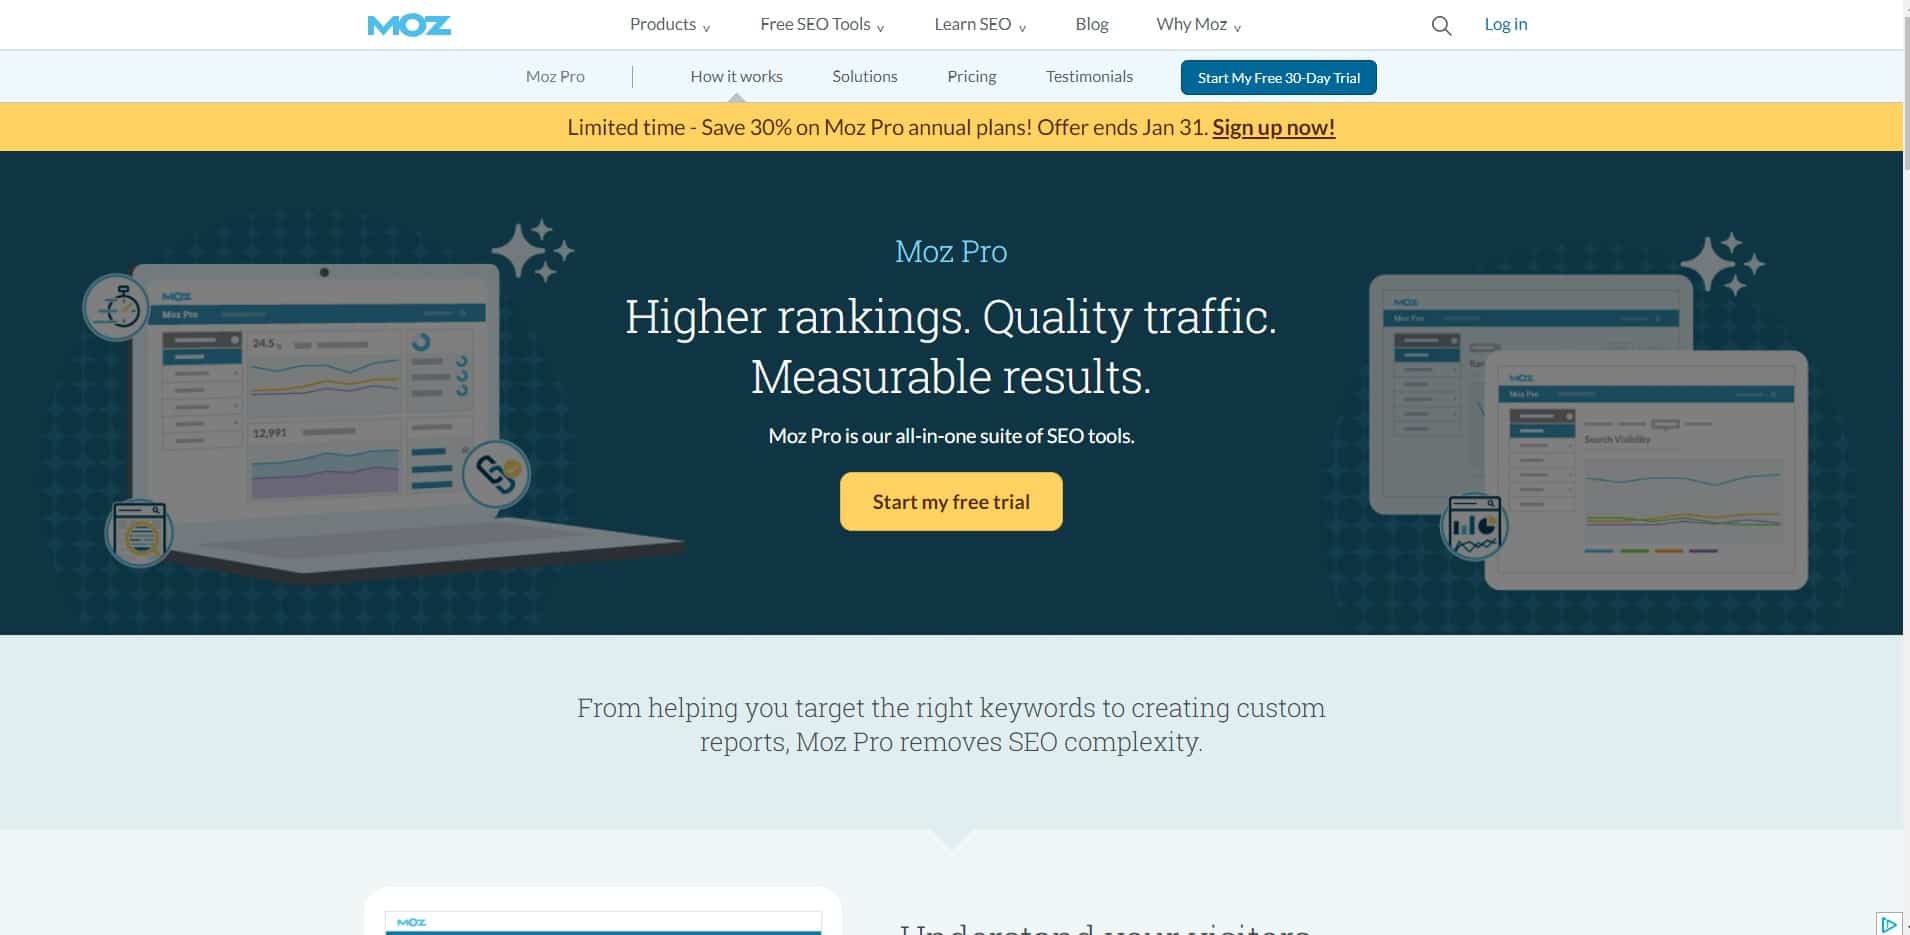 Moz Pro is more advanced Ubersuggest alternative for backlink audit and analysis